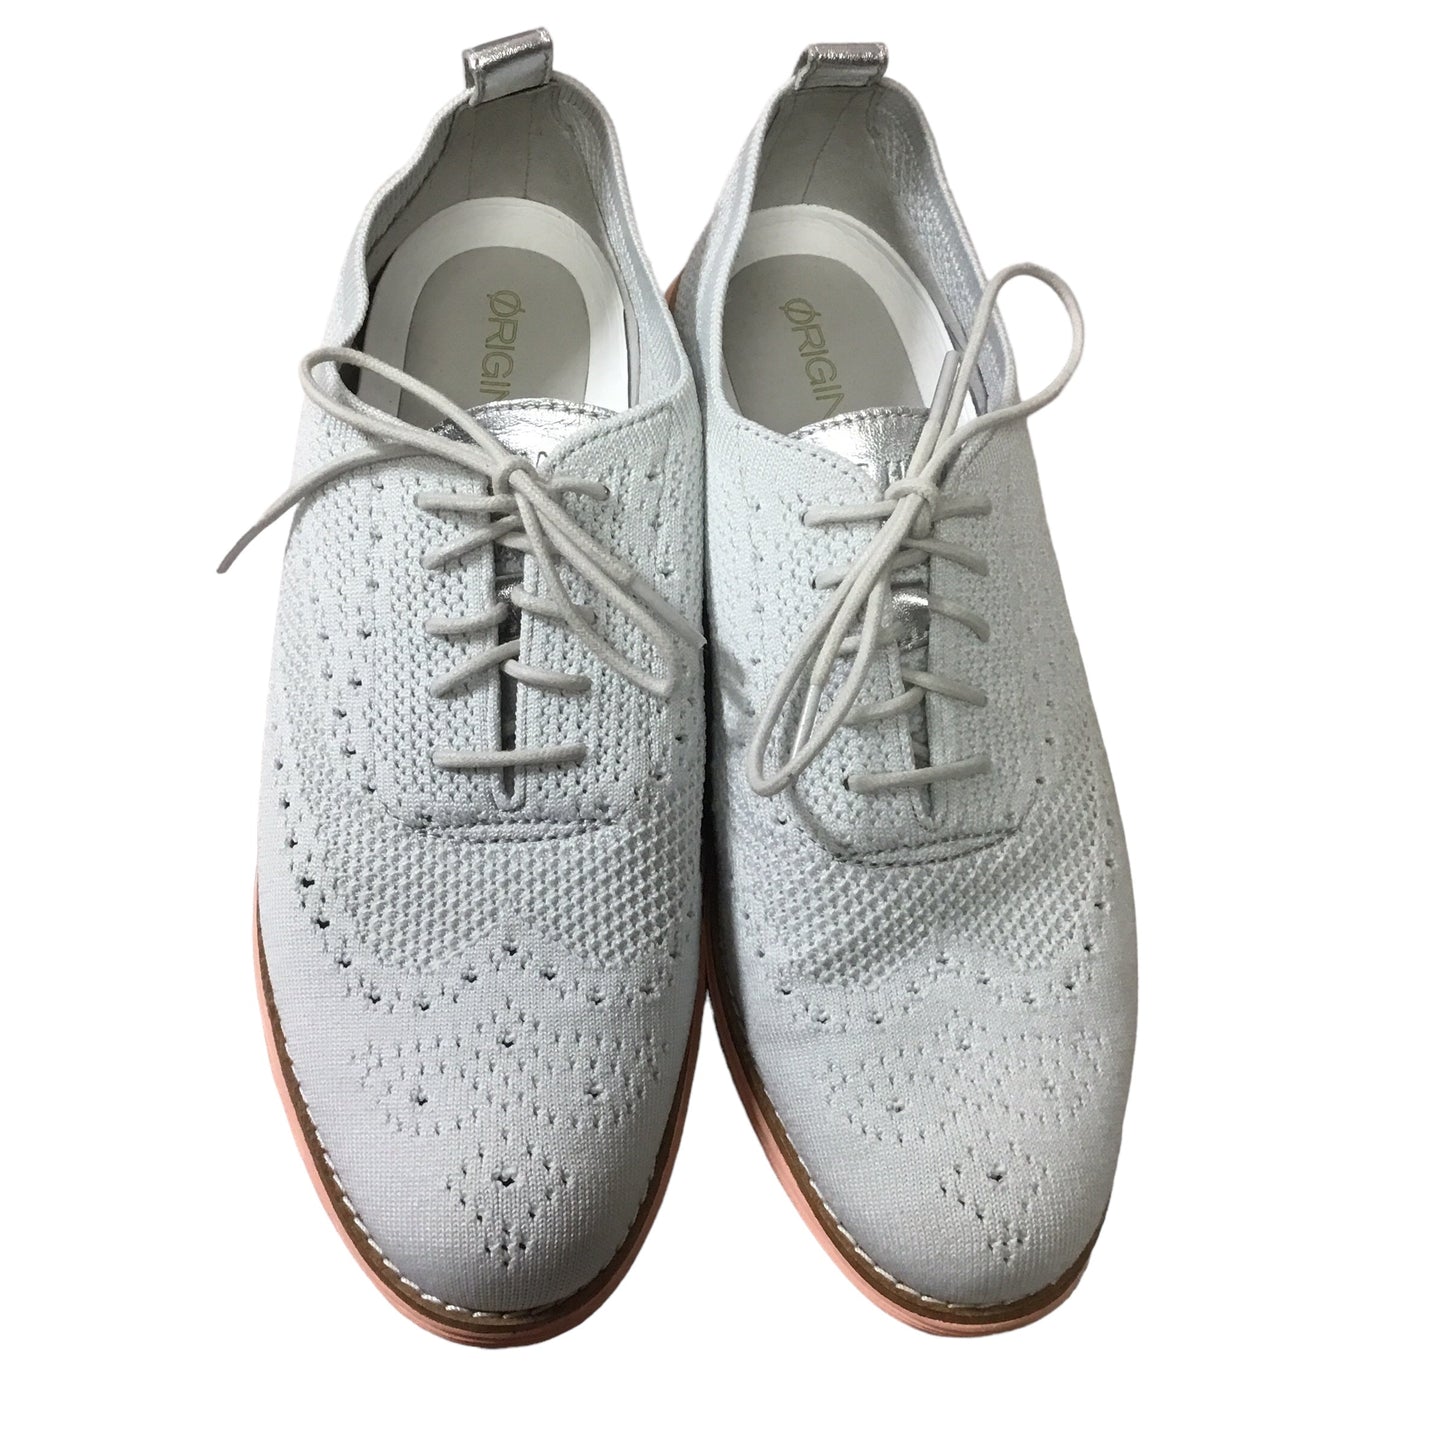 Silver Shoes Flats Cole-haan, Size 10